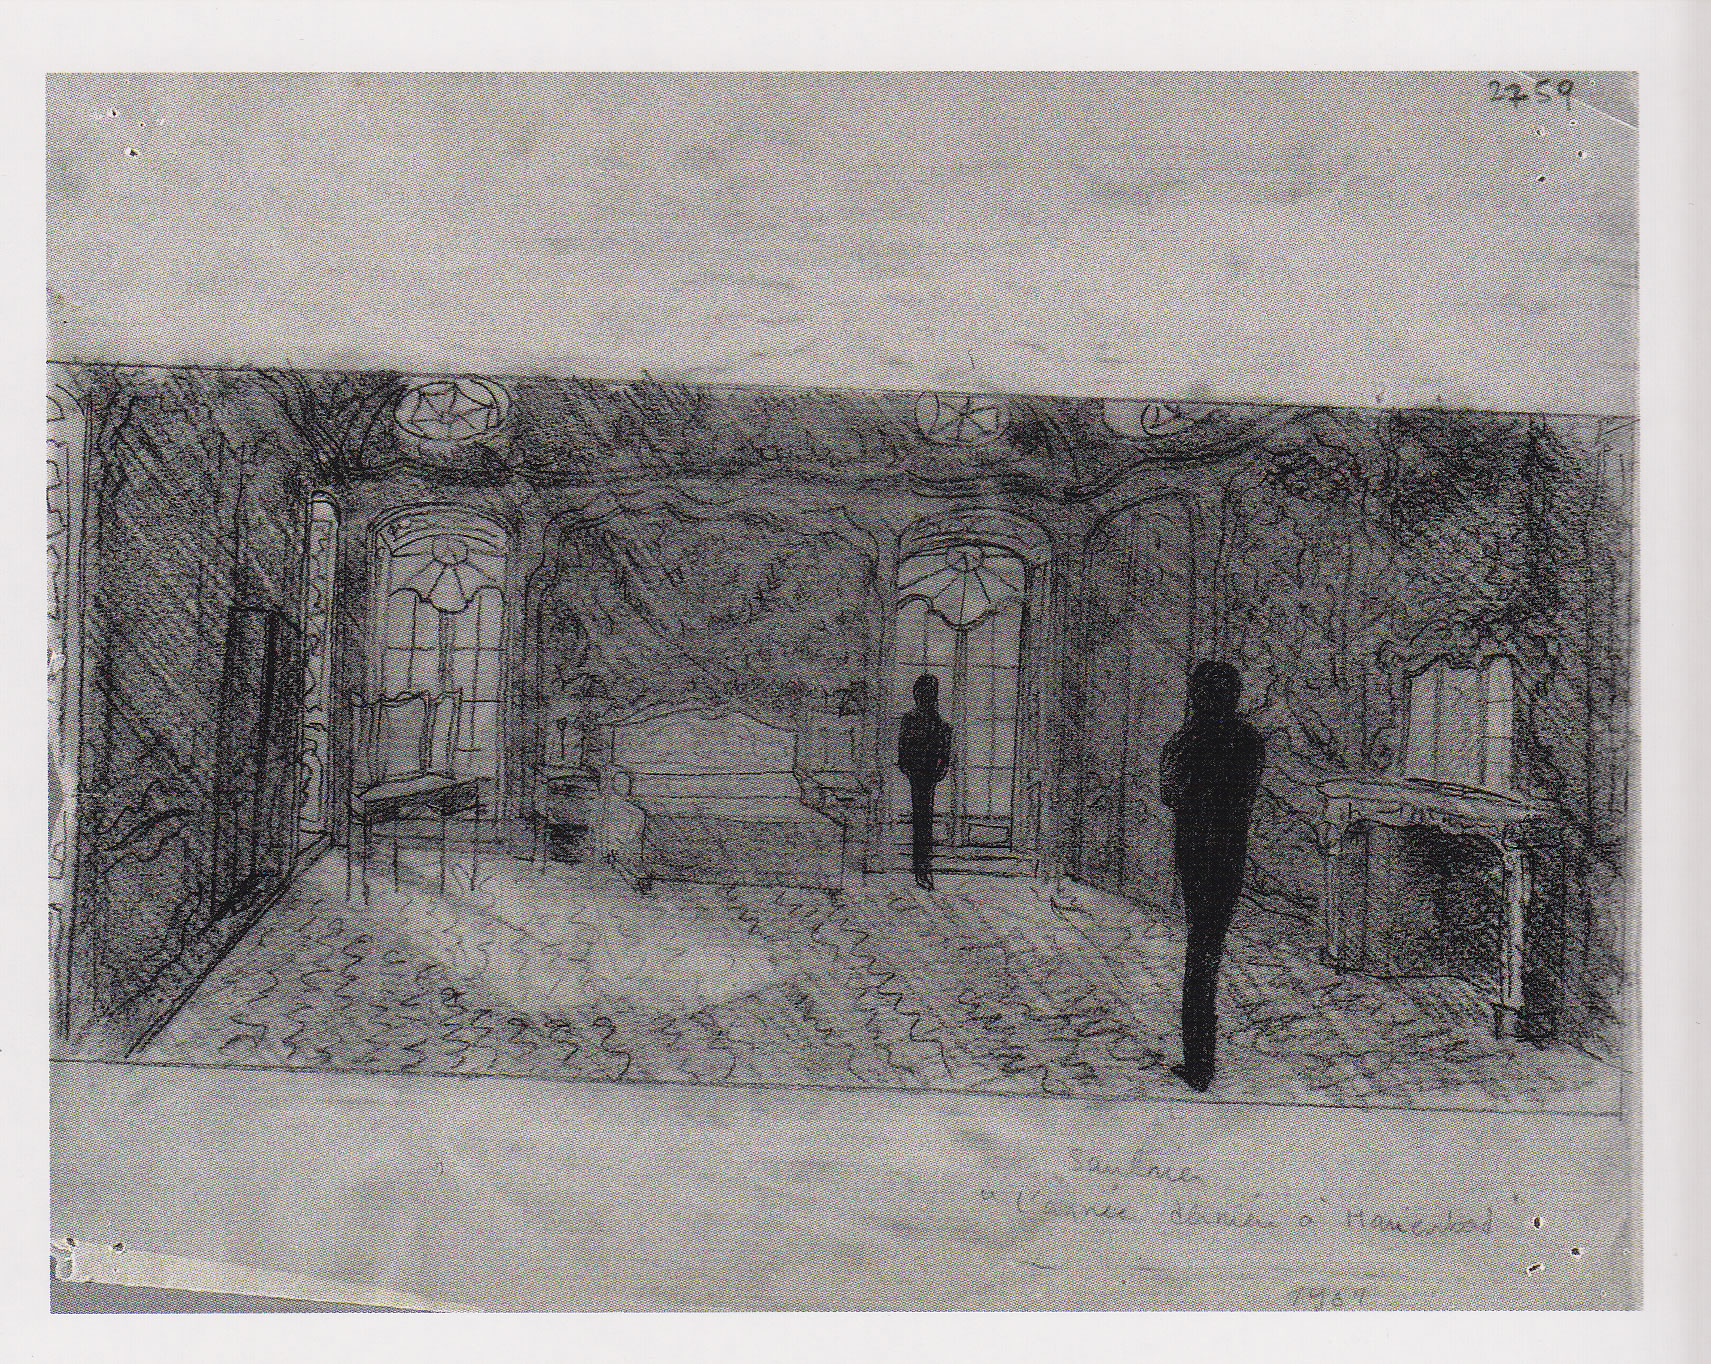 Jacques Saulnier, Design for the decor for Last Year at Marienbad, charcoal on paper, 1960.